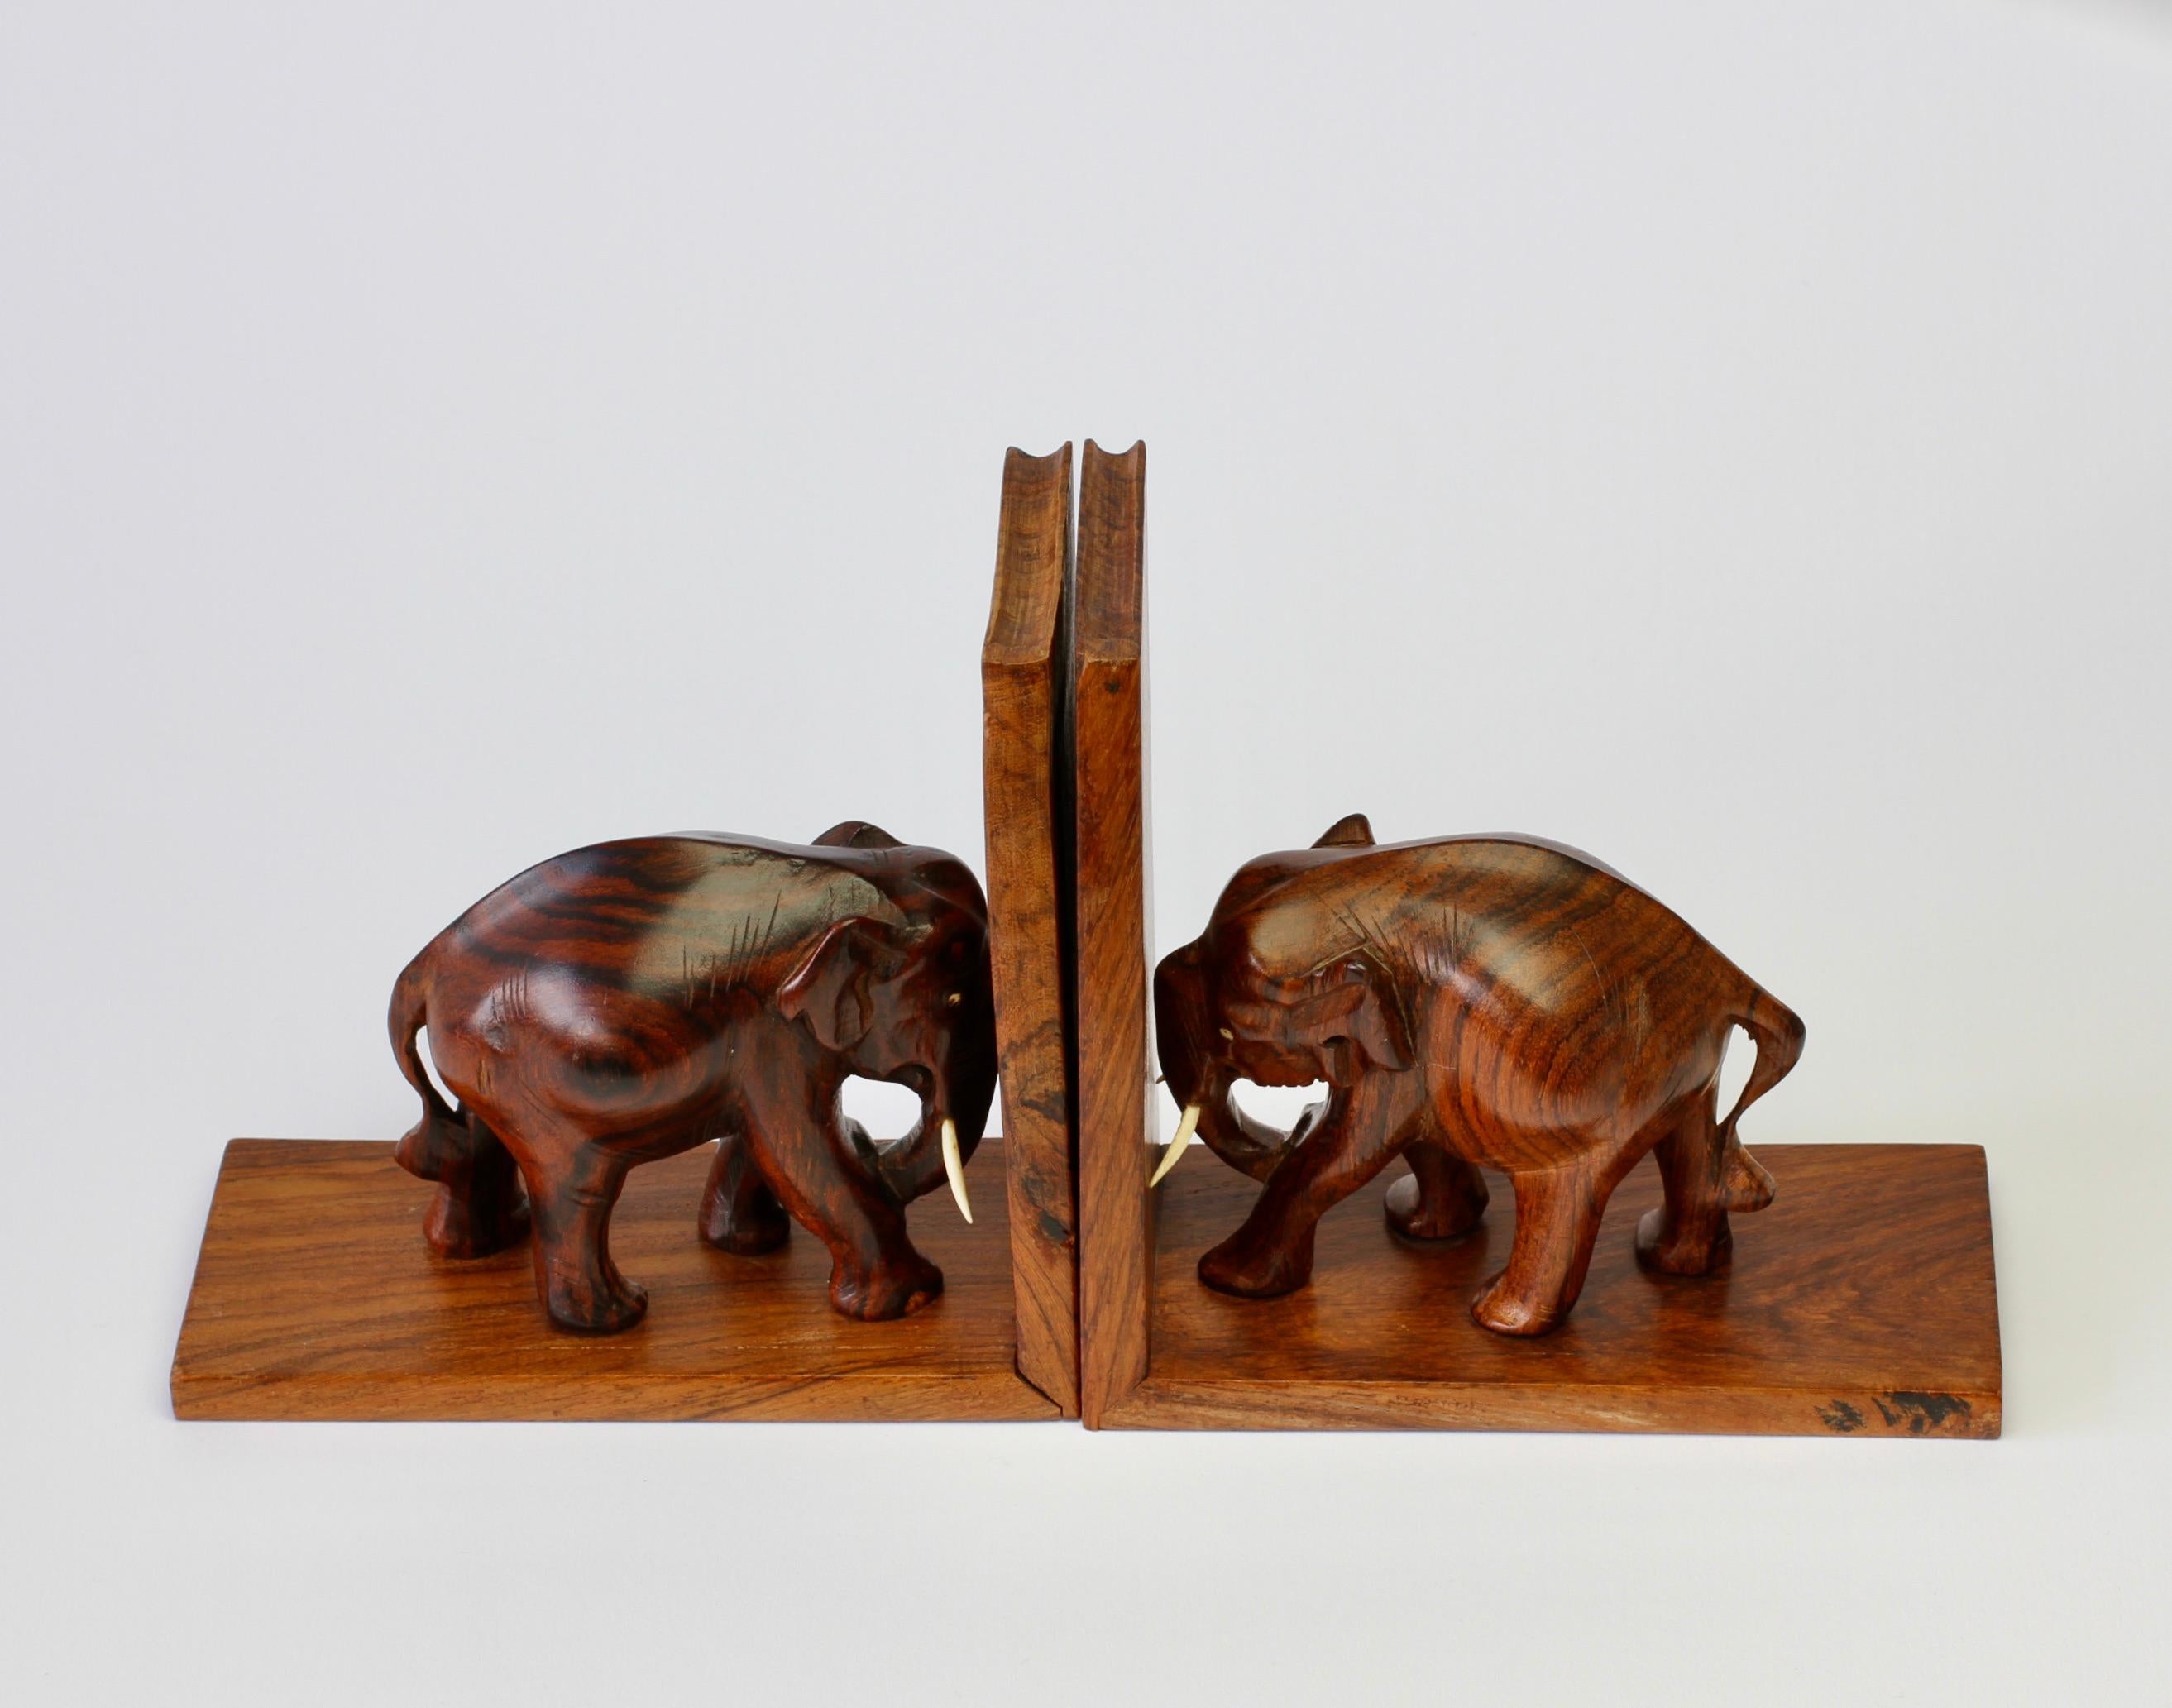 Mid-20th Century Hand Carved Wooden Book Ends with Elephant Sculptures / Figures, circa 1960s